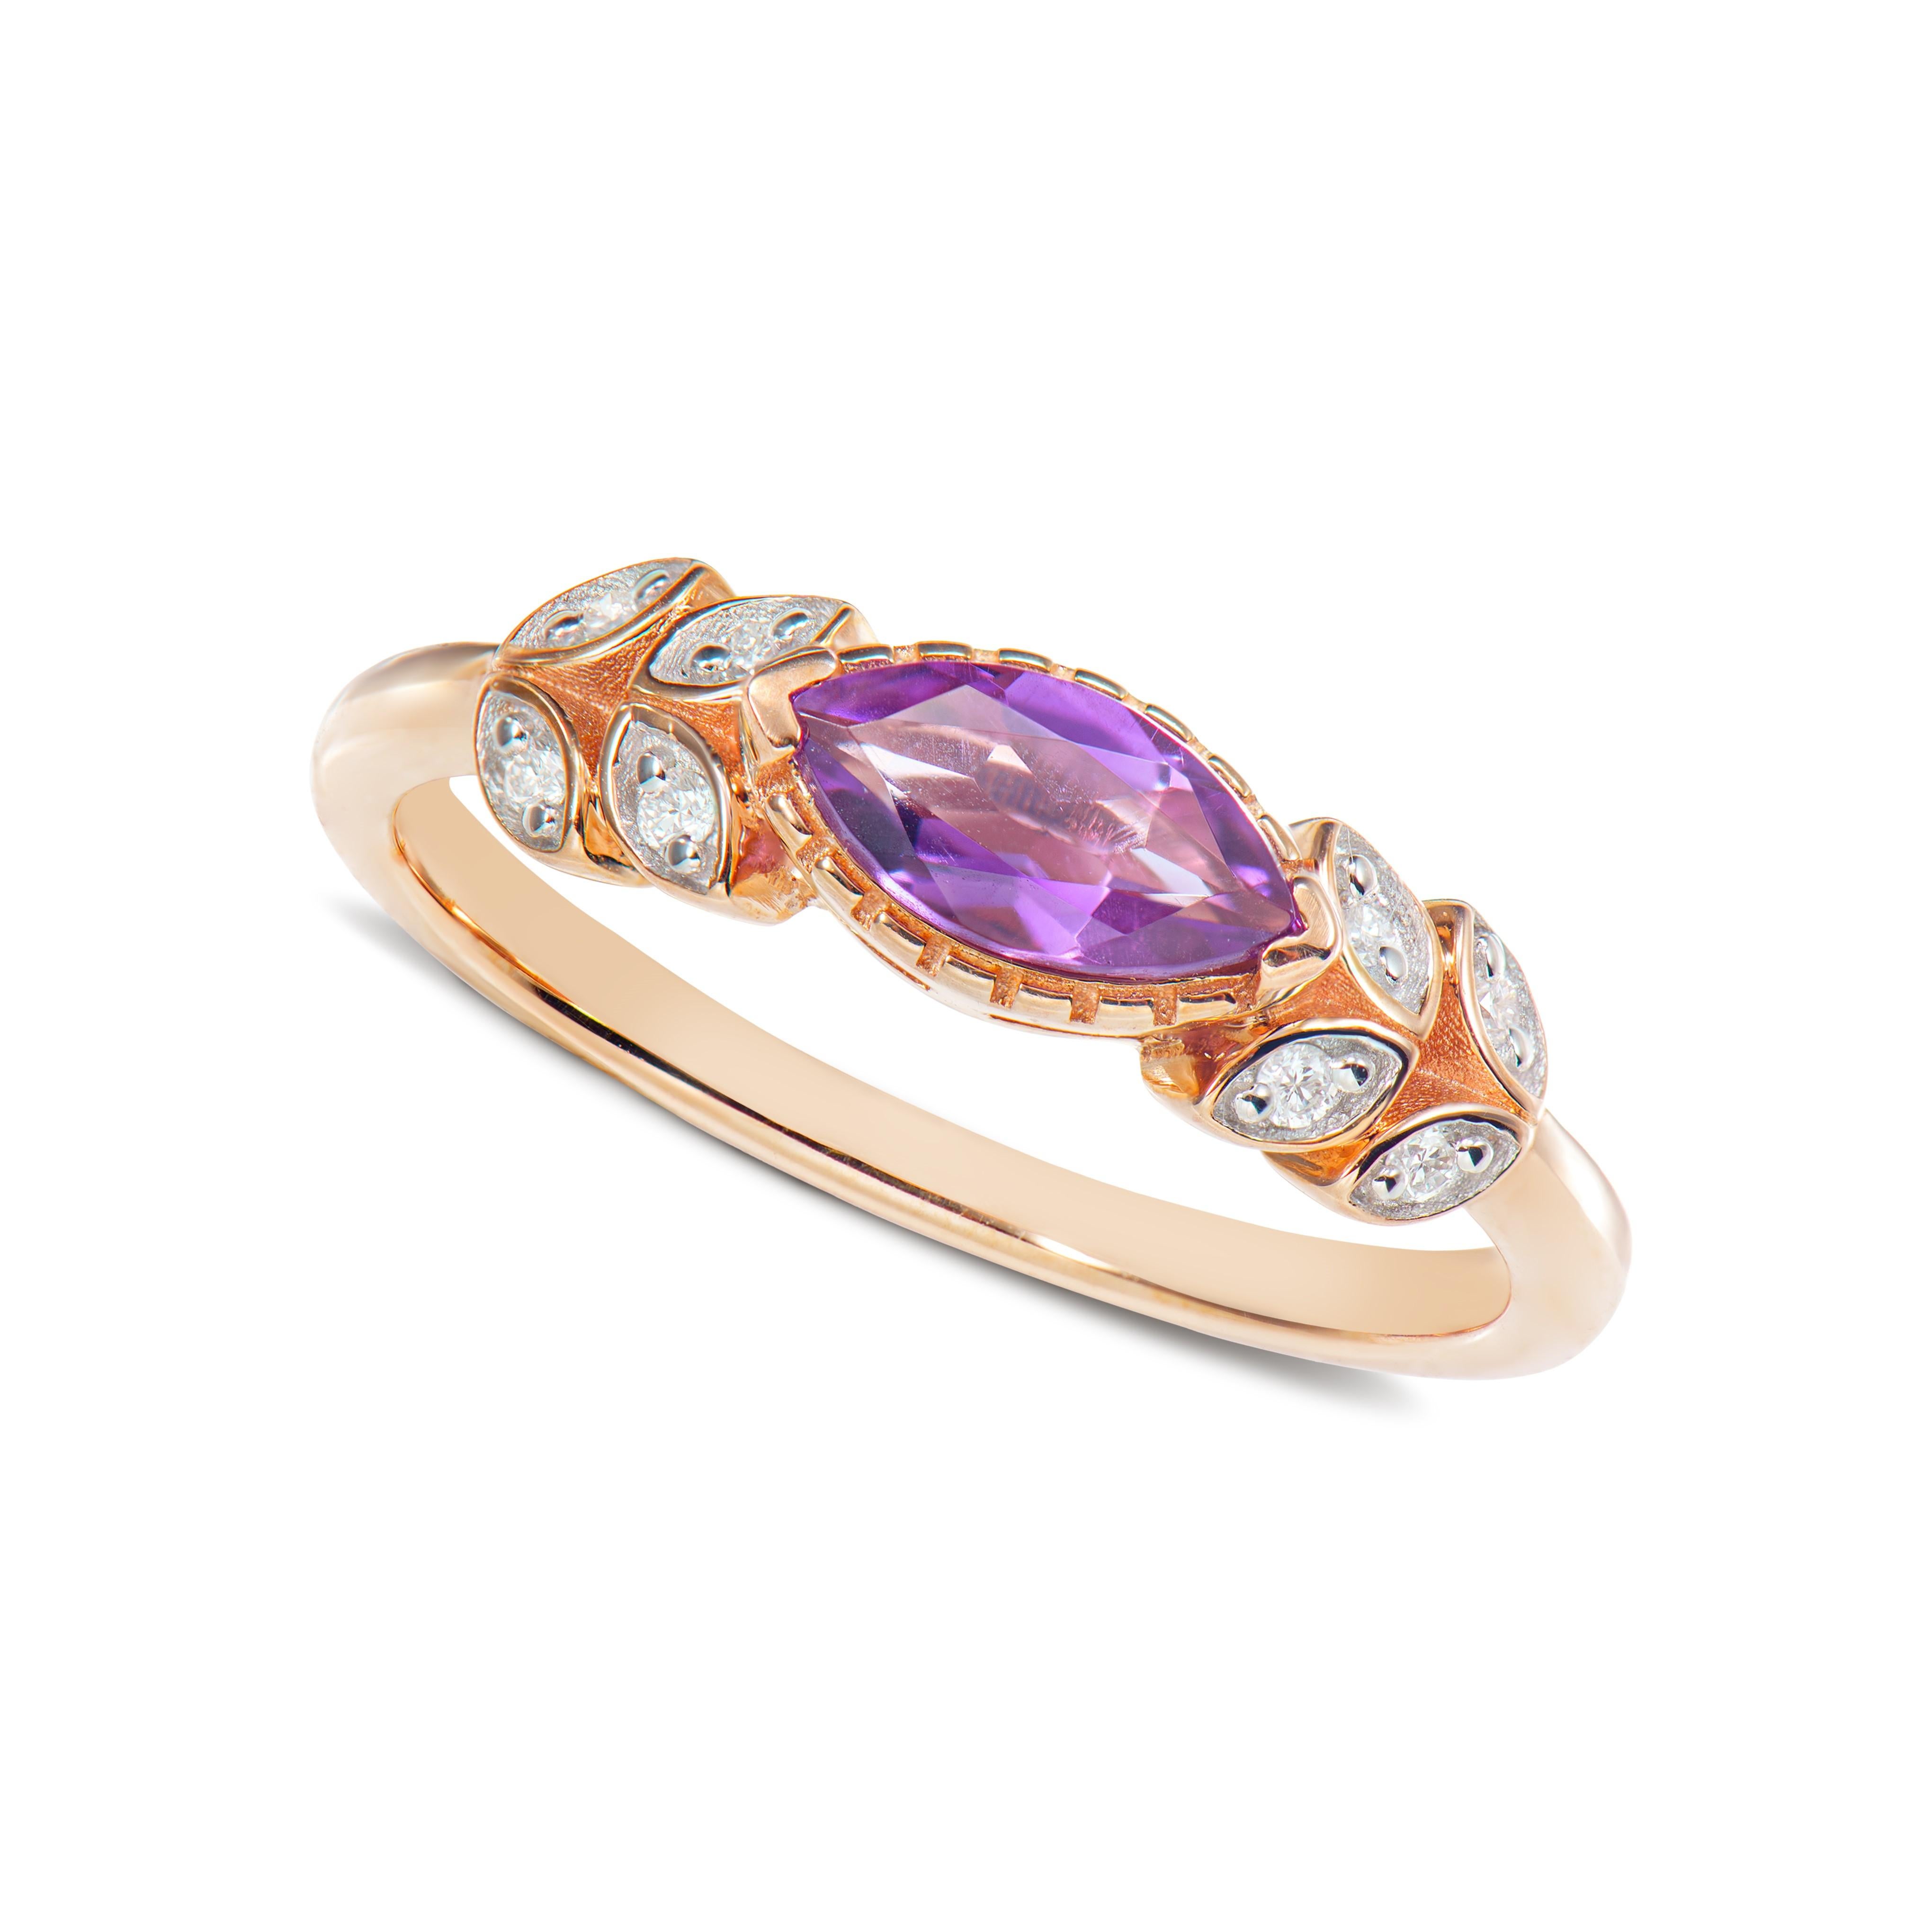 Contemporary 0.45 Carat Amethyst Fancy Ring in 14Karat Rose Gold with White Diamond.   For Sale